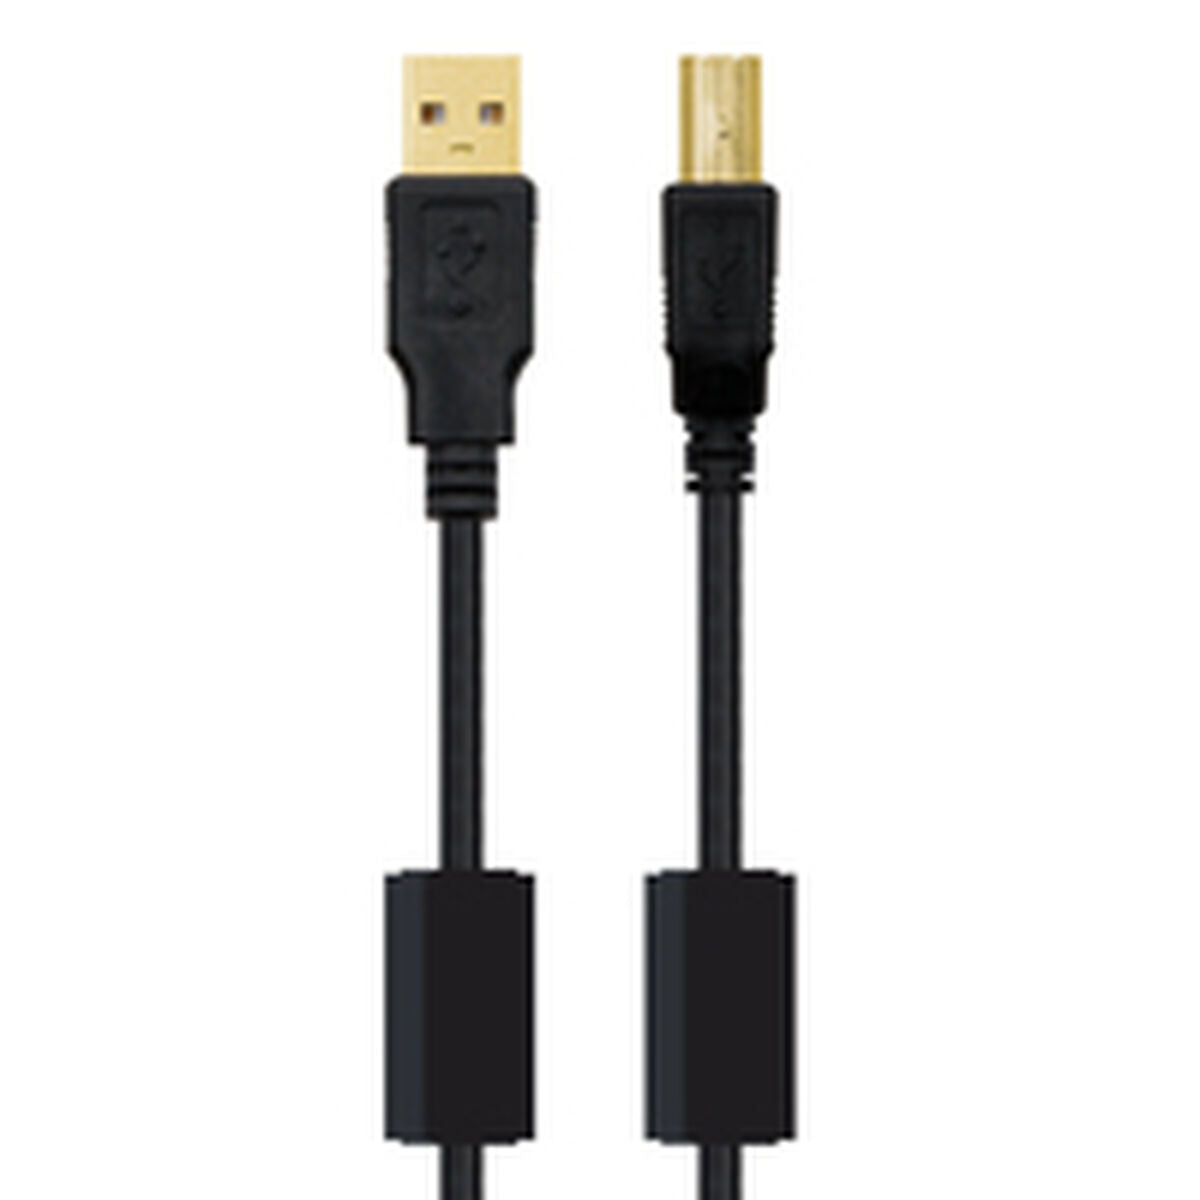 USB 2.0 A to USB B Cable NANOCABLE 10.01.1205 Black 5 m